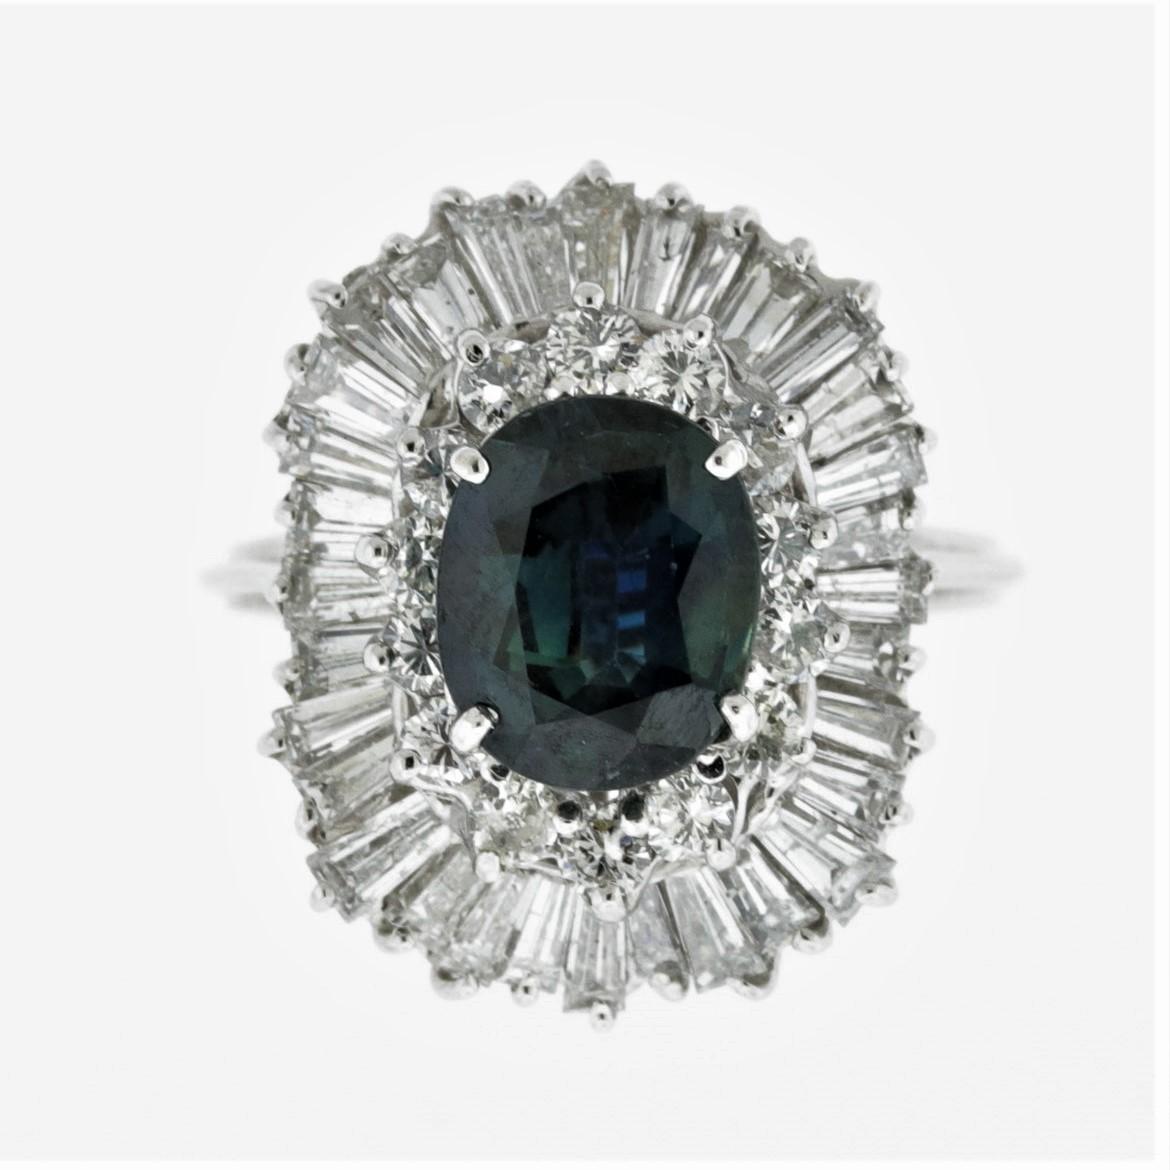 A lovely ring featuring a uniquely colored natural sapphire. The sapphire weighs 2 carats and has a greenish-blue color that sparkles in the light. It is complemented by approximately 3 carats of round brilliant and baguette-cut diamonds set around